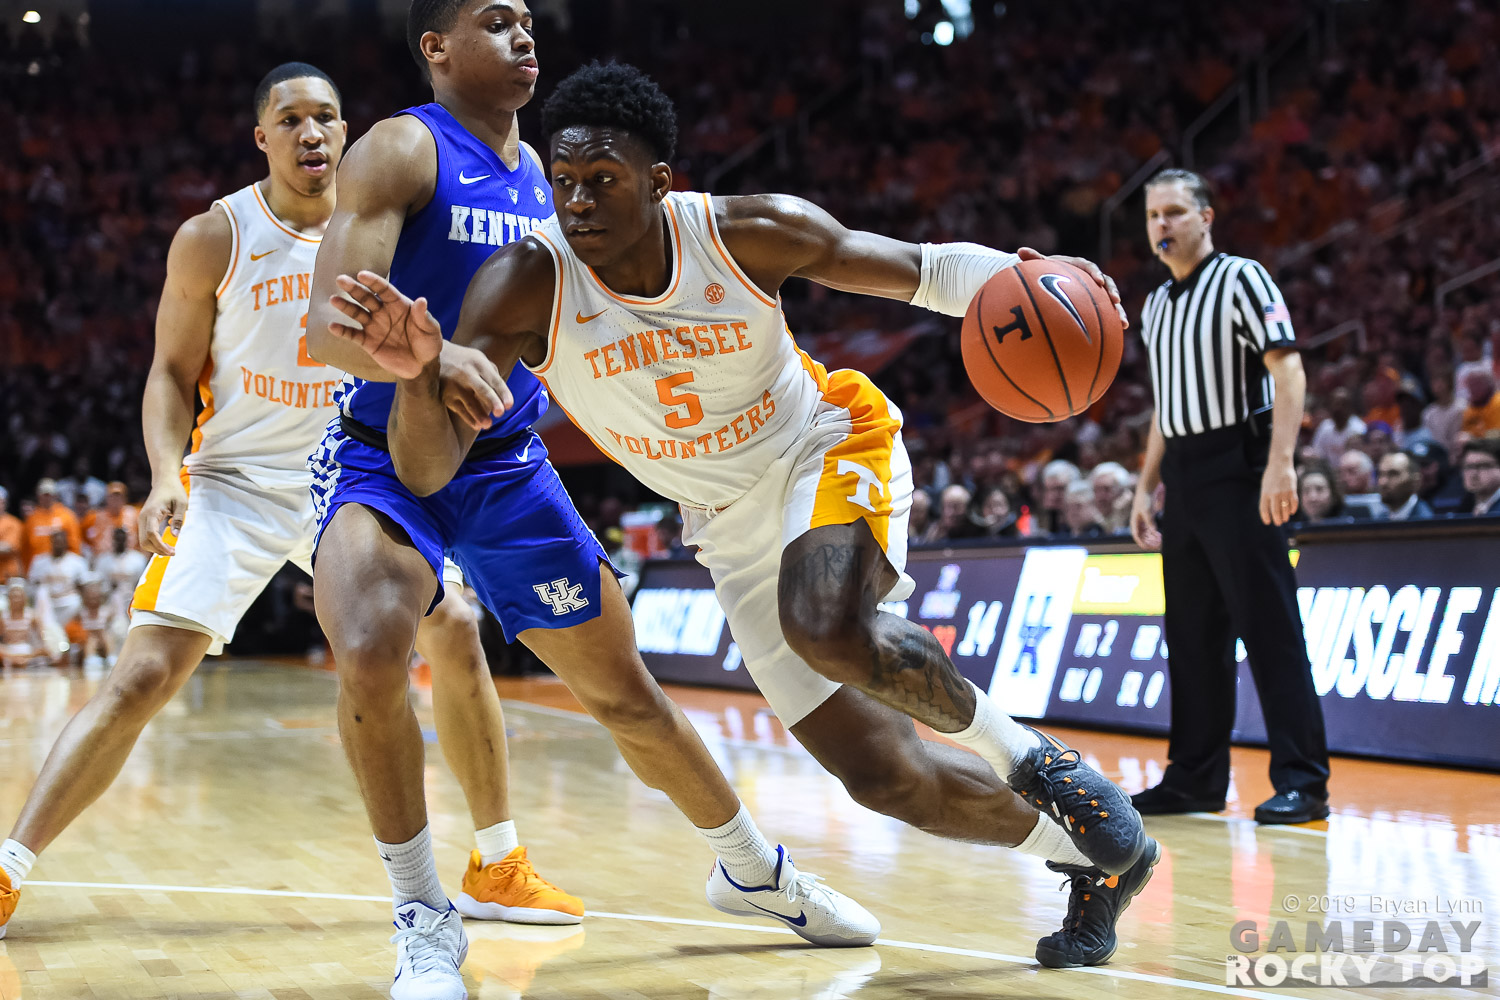 Conference Tournament Week rooting guide for Vols fans